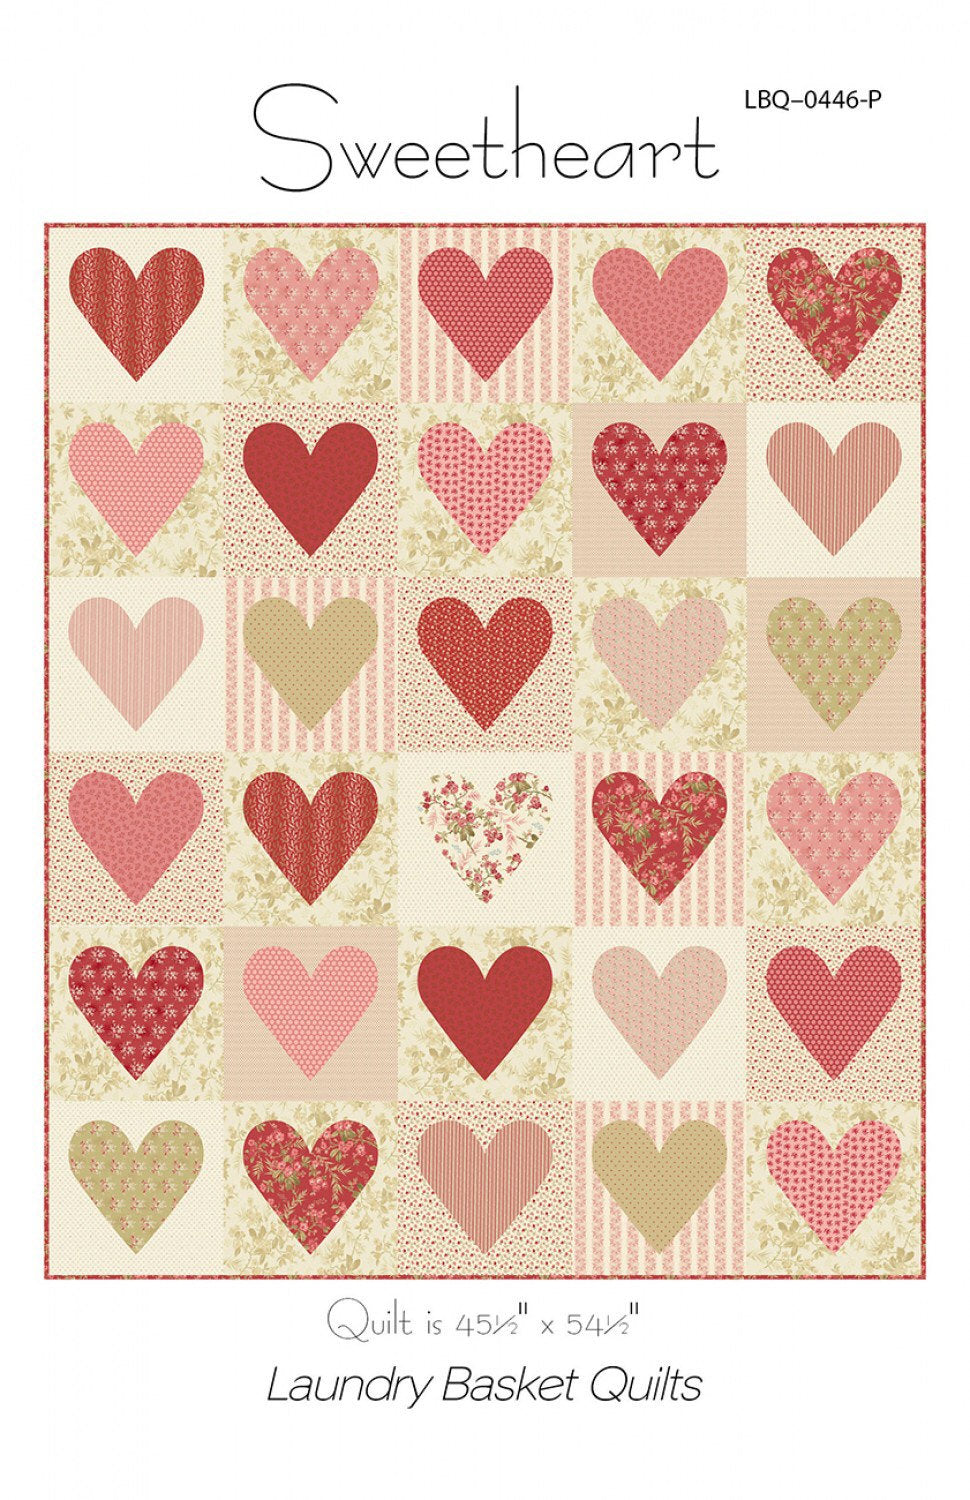 Sweetheart Quilt Pattern - Laundry Basket Quilts - Edyta Sitar - Heart Quilt Pattern - Valentines Day Quilt Pattern - Layer Cake Friendly